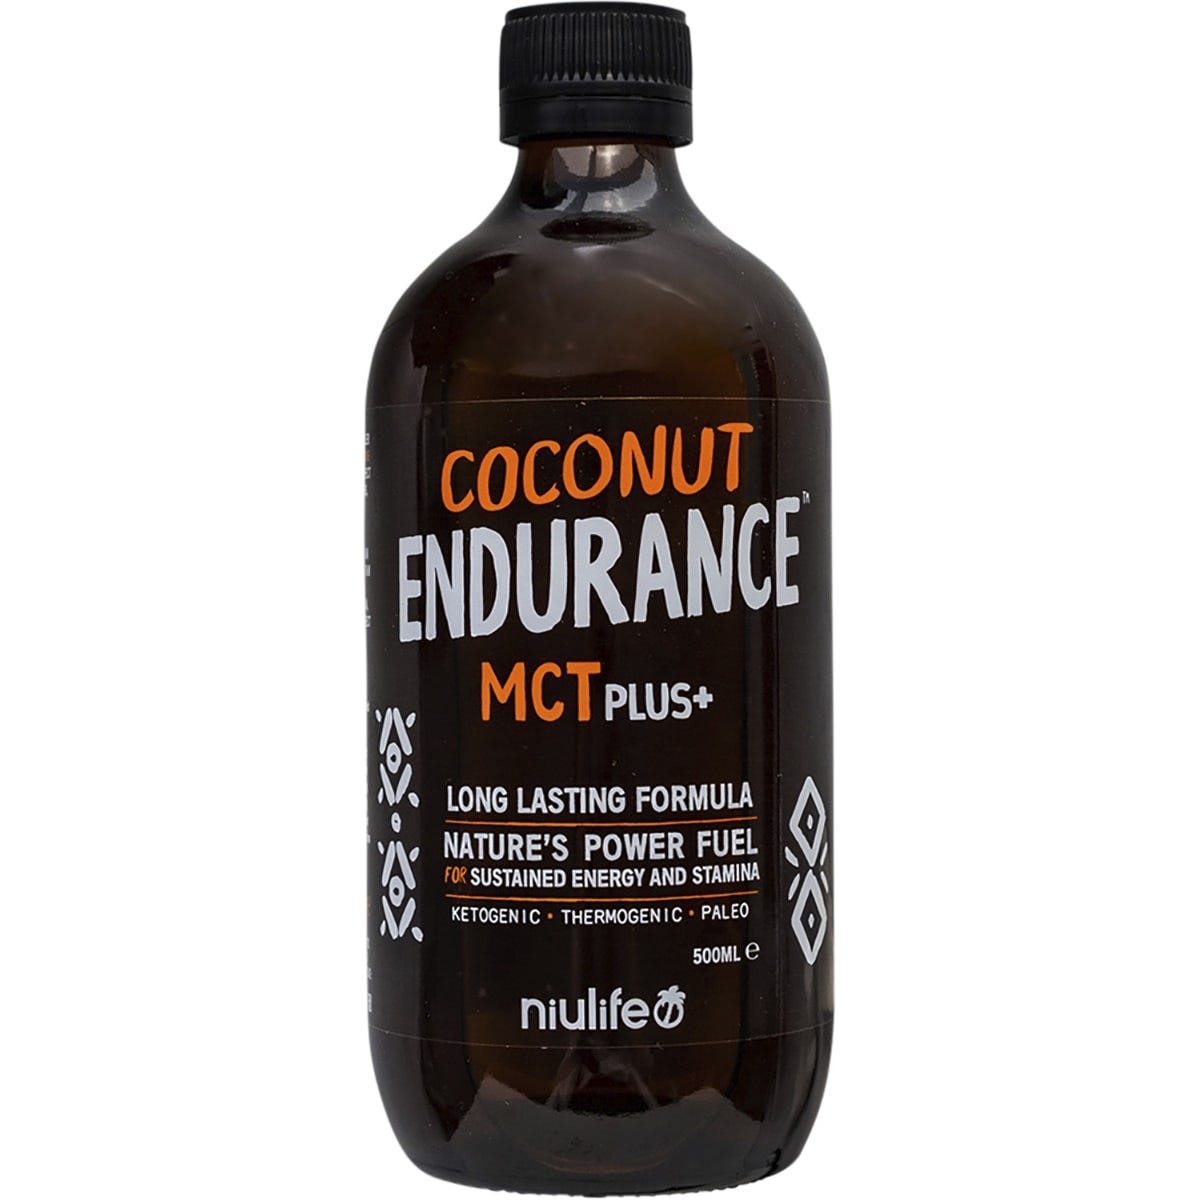 Niulife Coconut MCT Plus+ Endurance 500ml - Dr Earth - Oil & Ghee, Supplements, Nutrition